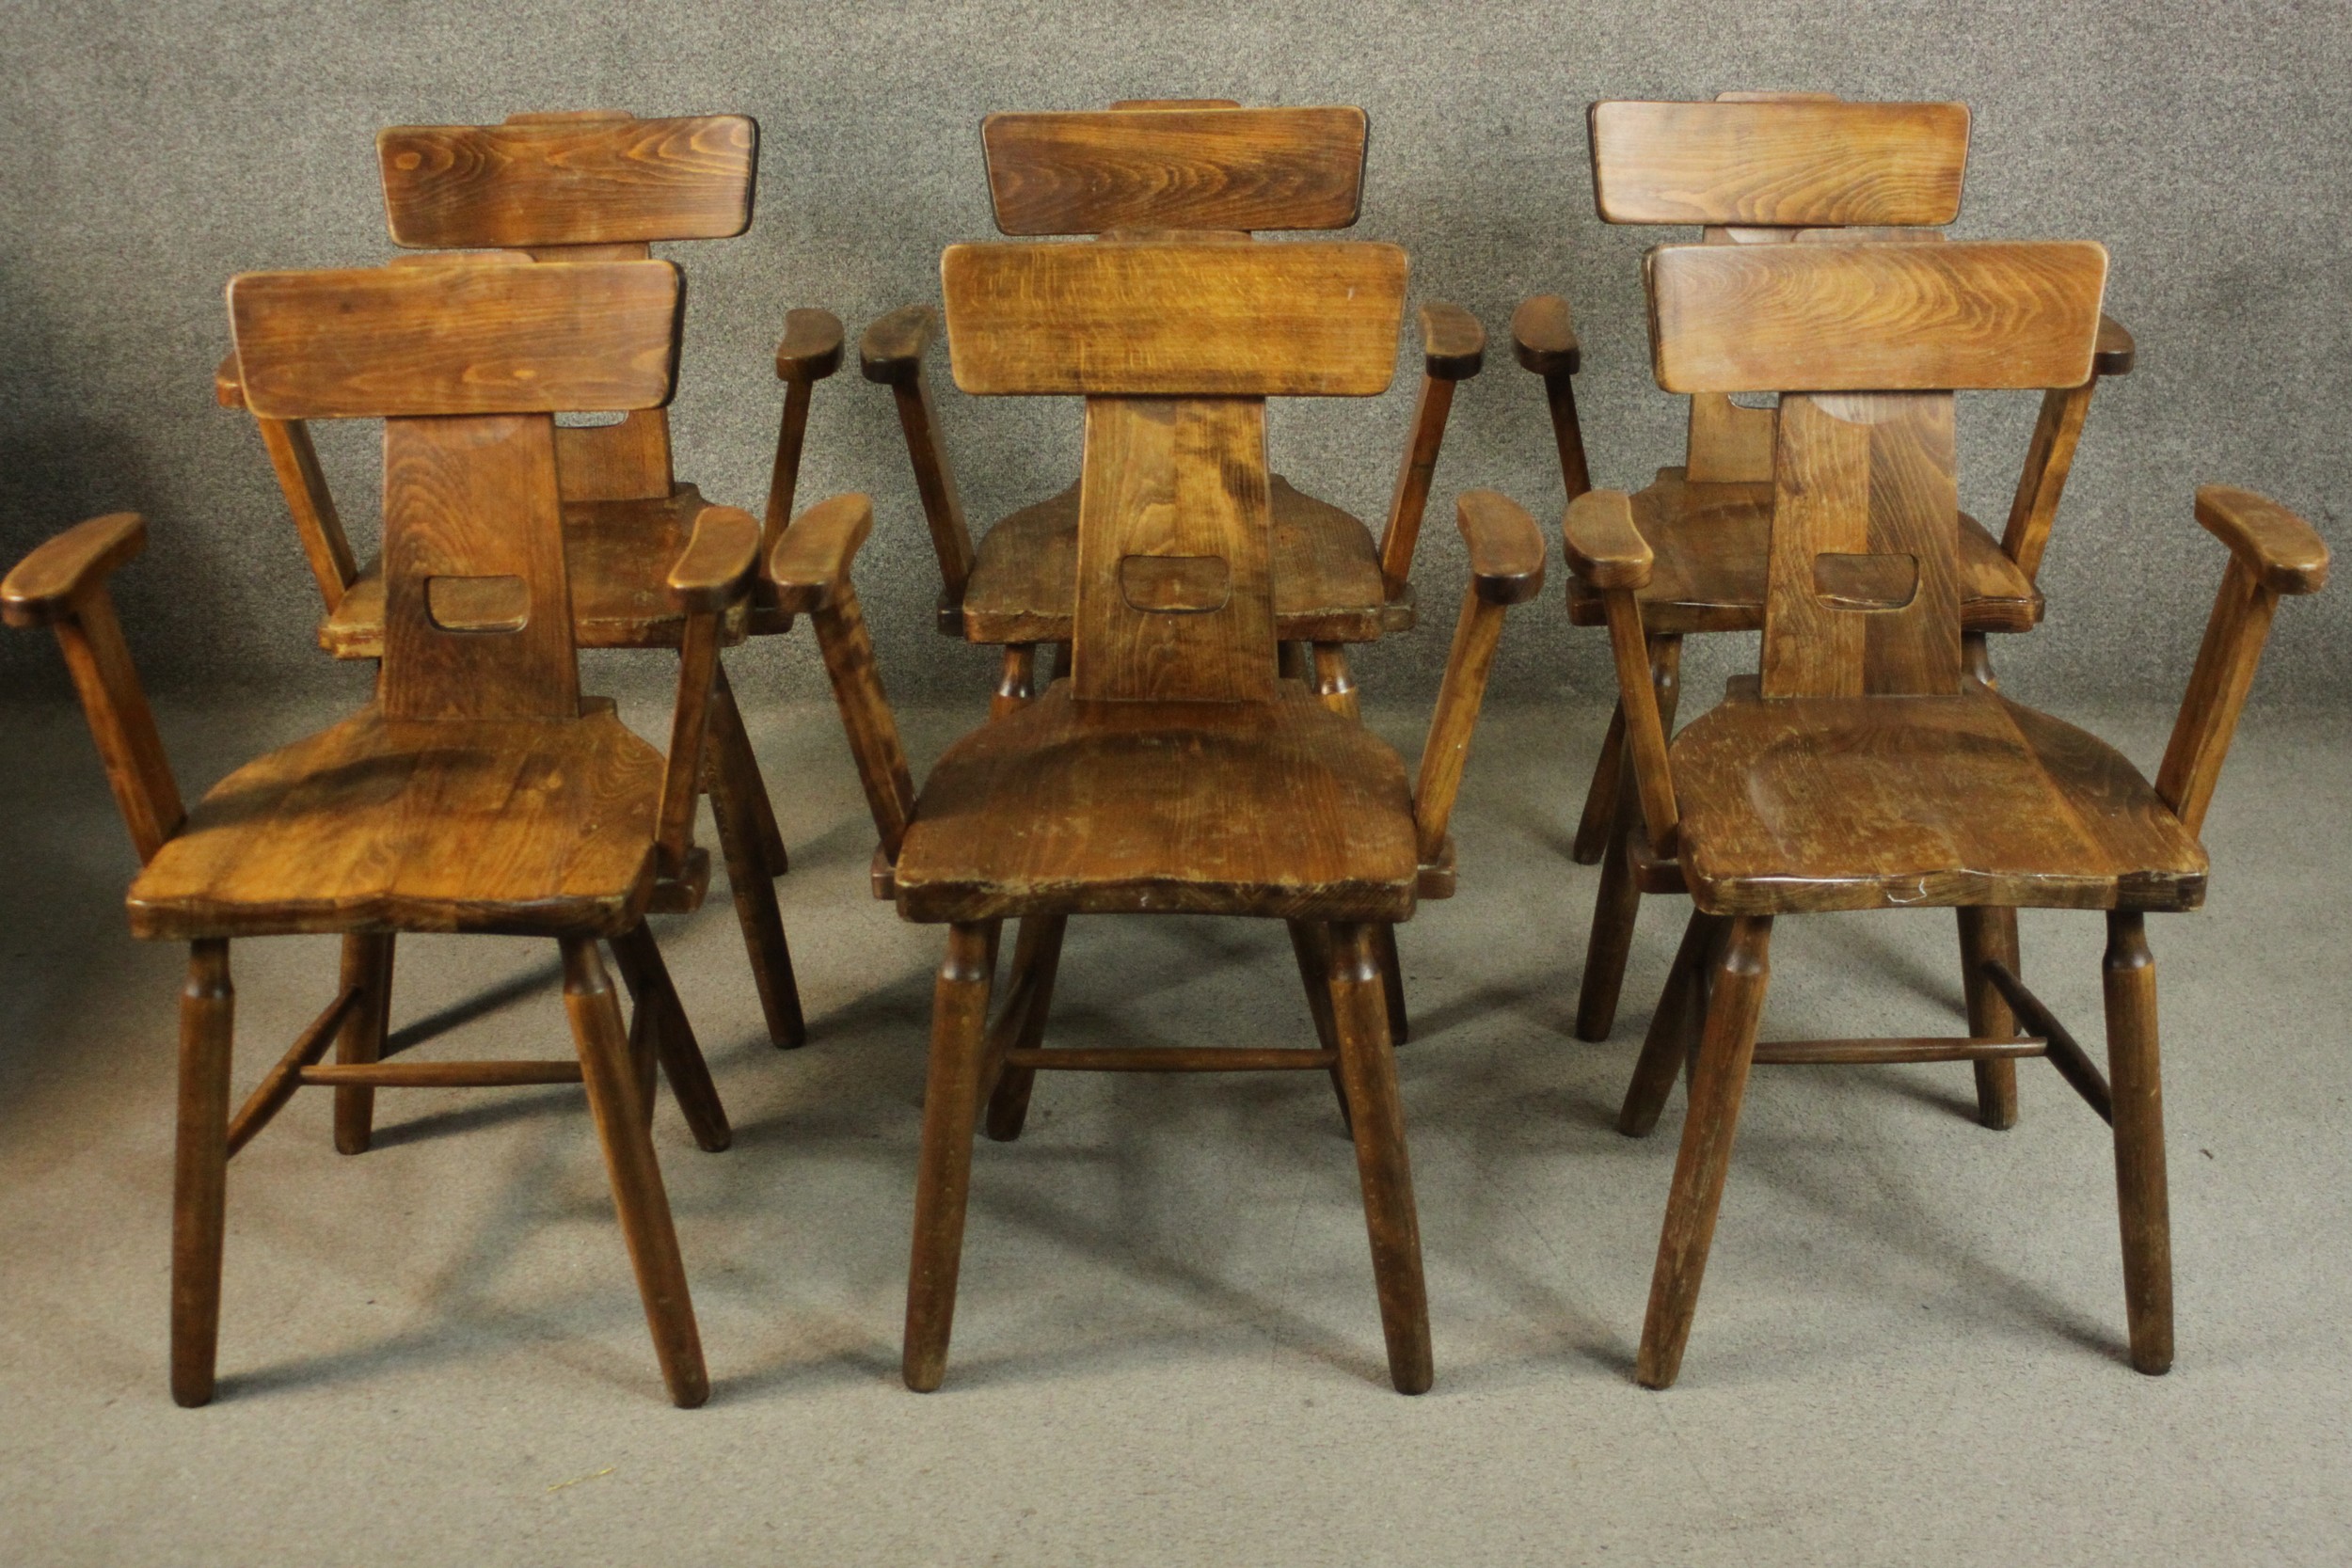 A set of six 20th century country style chairs, with a bar back on a splat with a cutout, over a